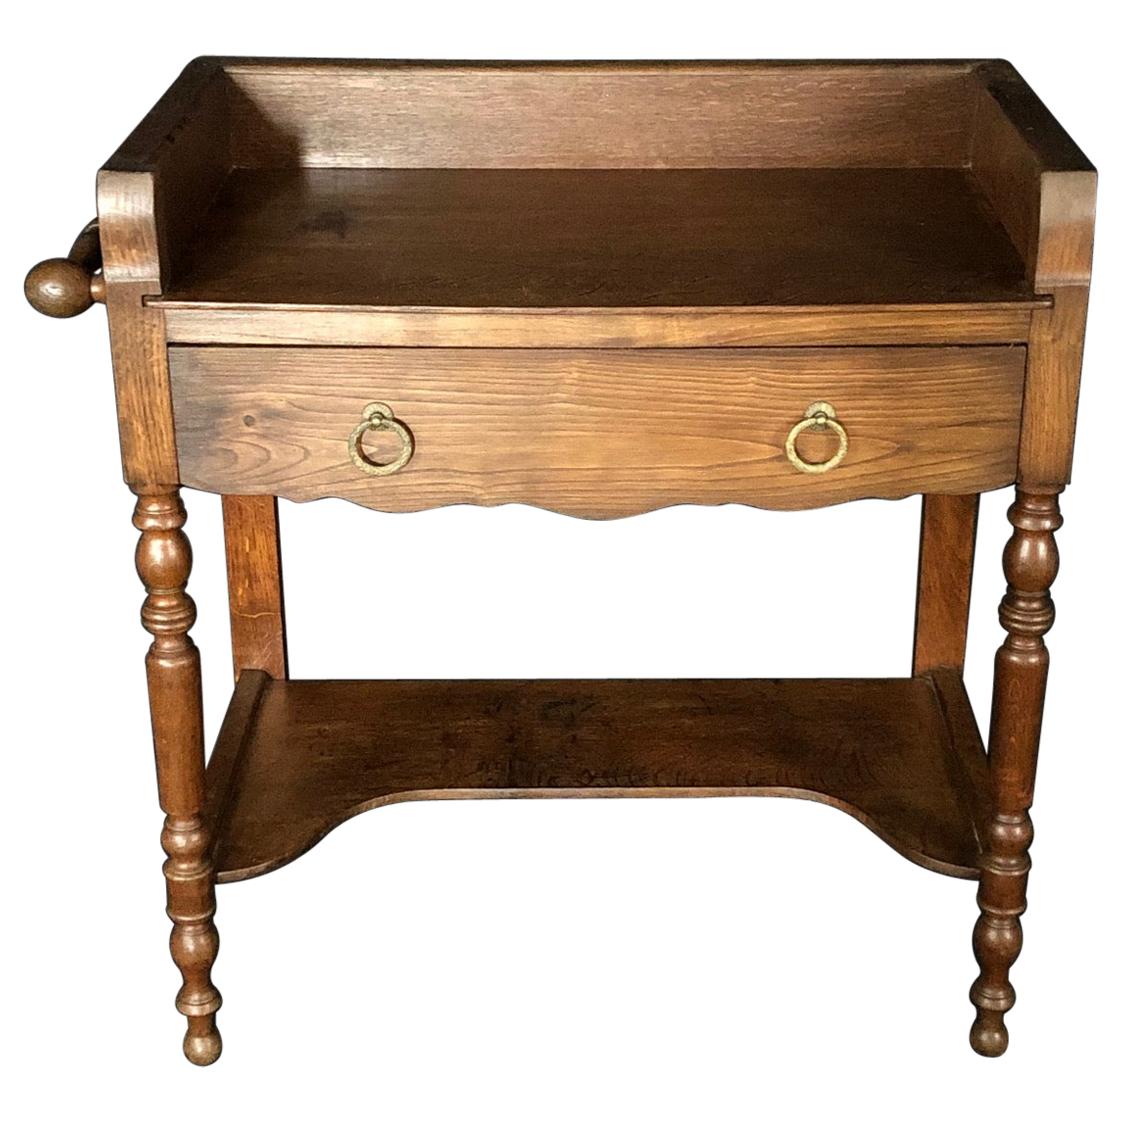 Charming French Oak Washstand Side Table with Bronze Pulls from Normandy